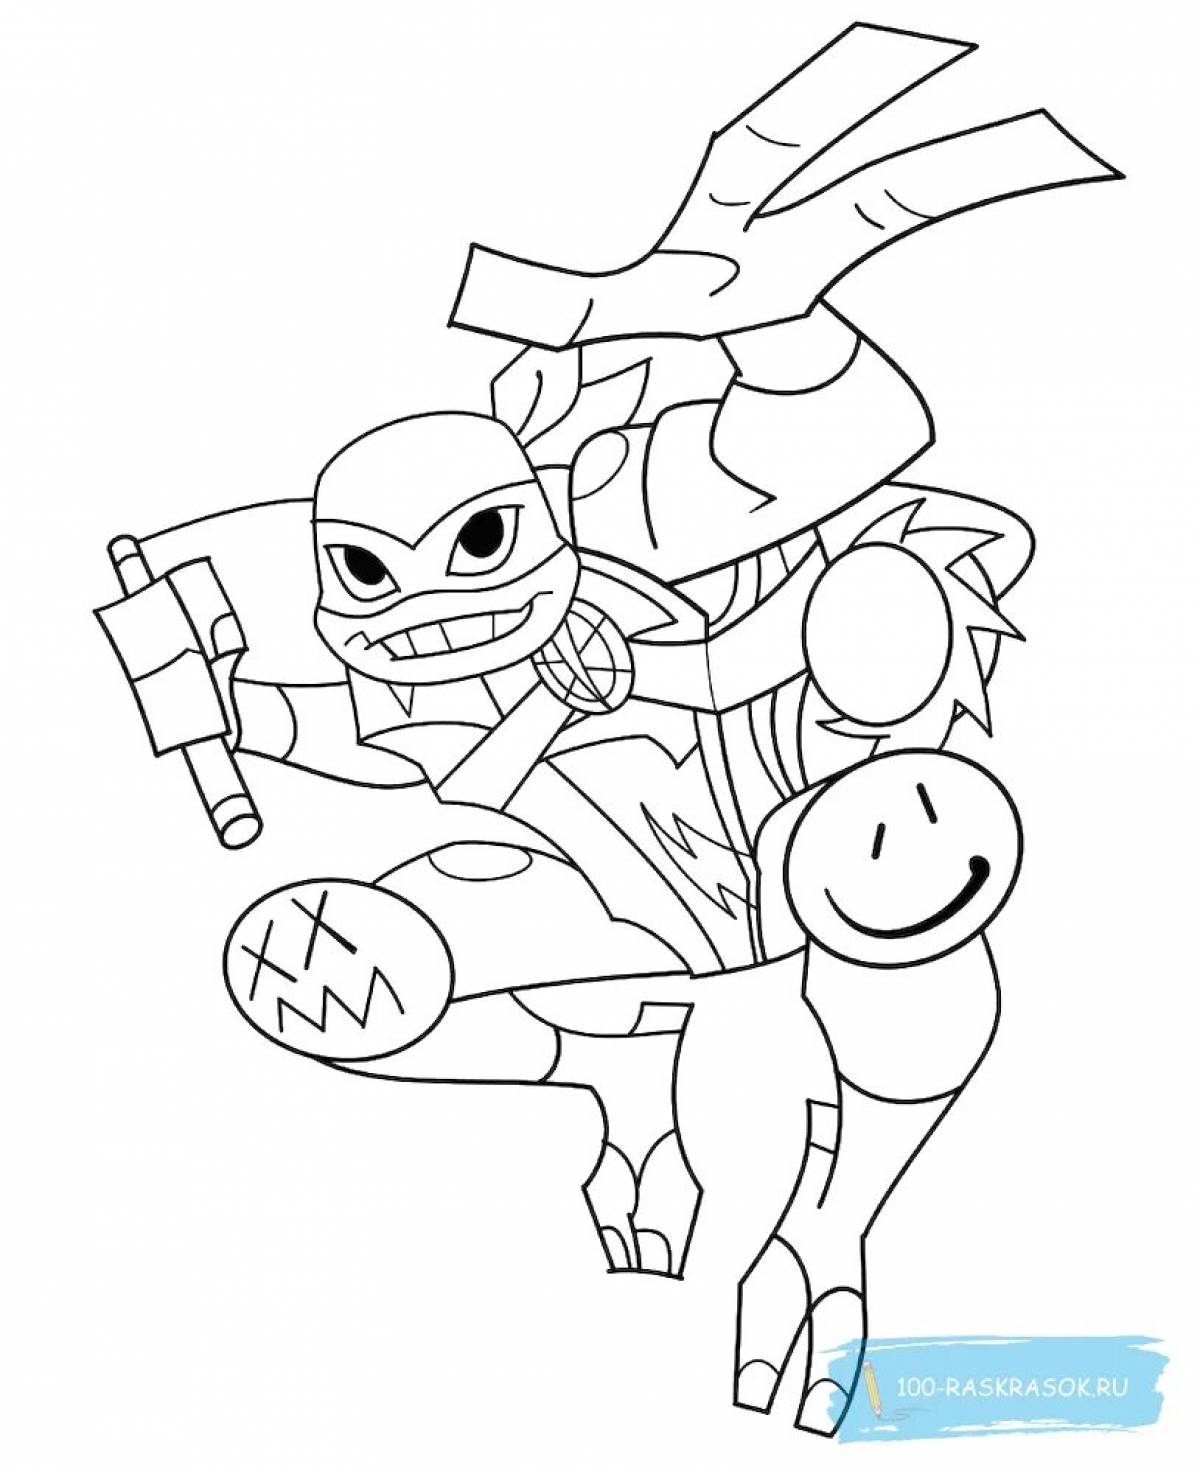 Inviting gujitsu coloring book for the little ones